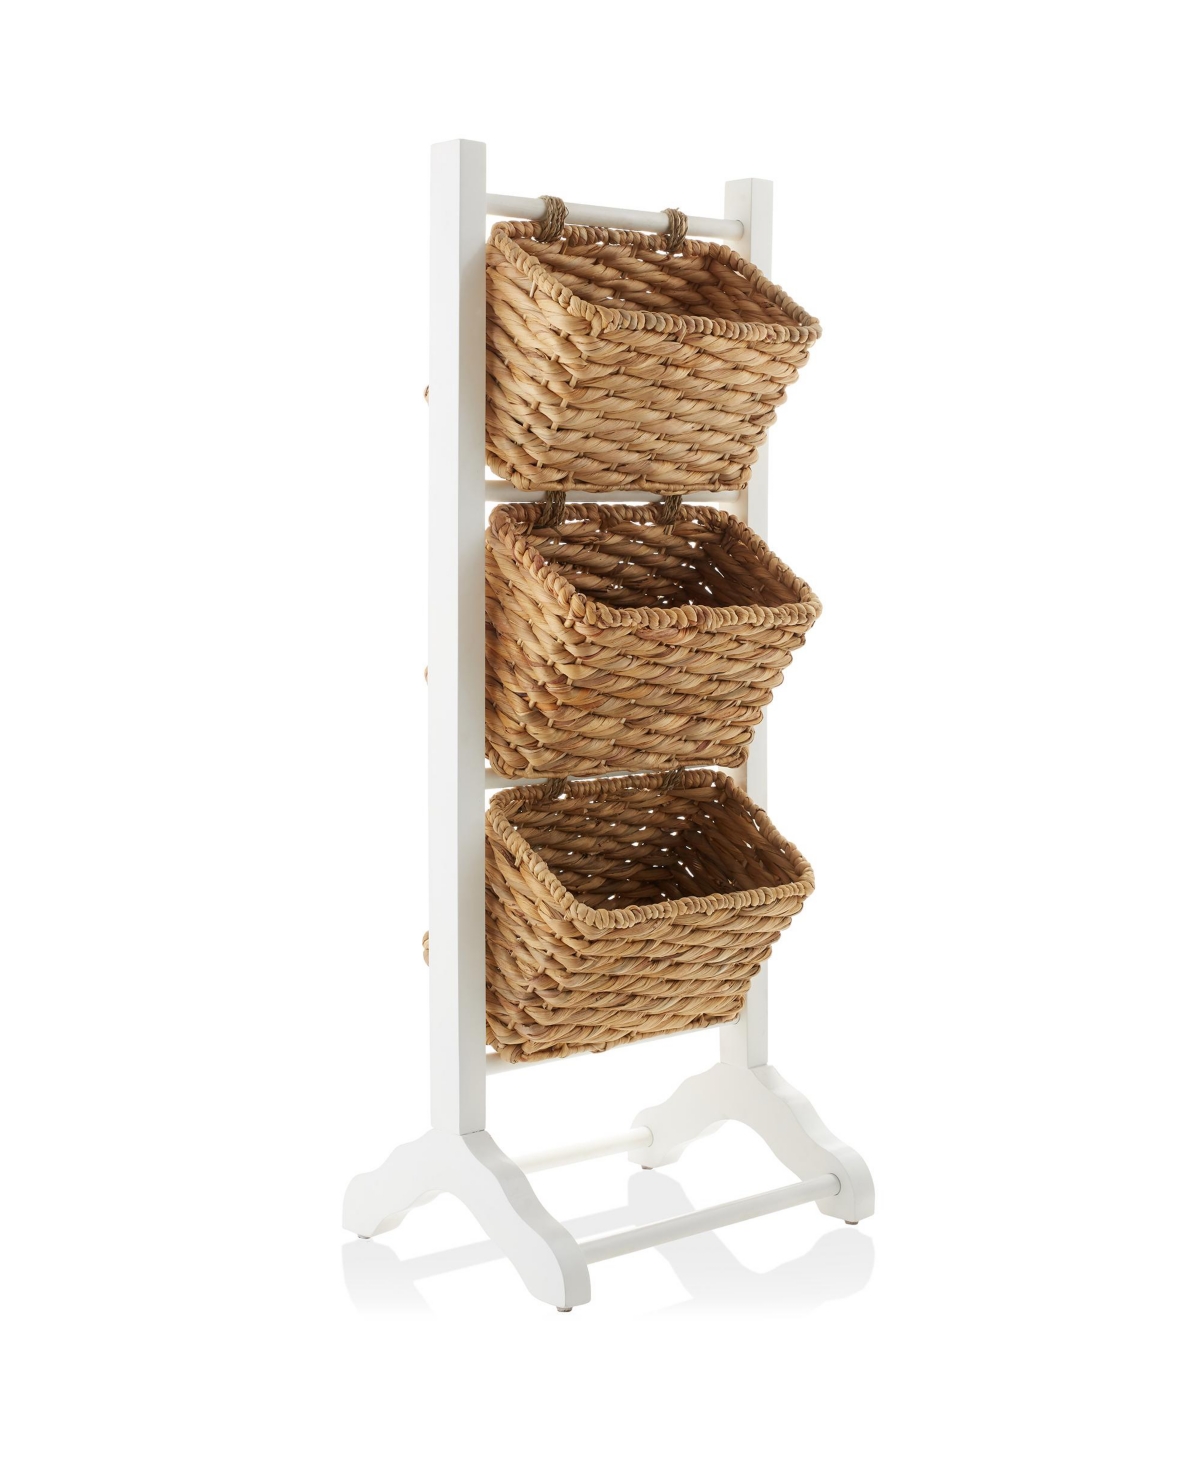 3-Tier Floor Stand Rack with Hanging Storage Baskets, Wood Tower Organizer for Bathroom, Kitchen, Laundry, Living Room - White, natural